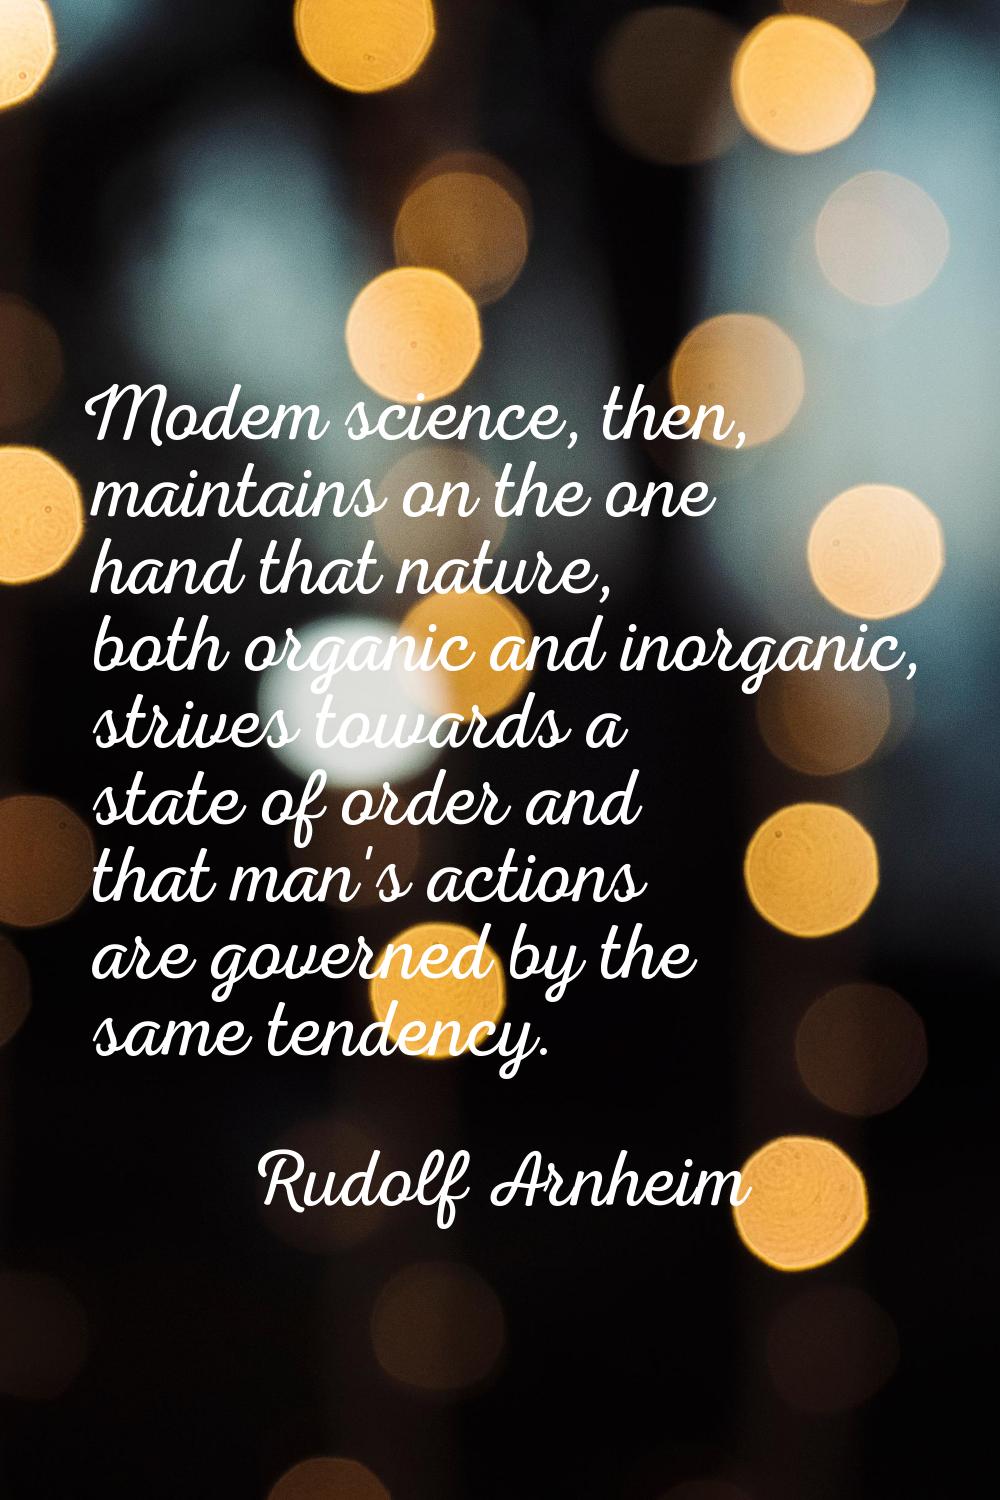 Modem science, then, maintains on the one hand that nature, both organic and inorganic, strives tow